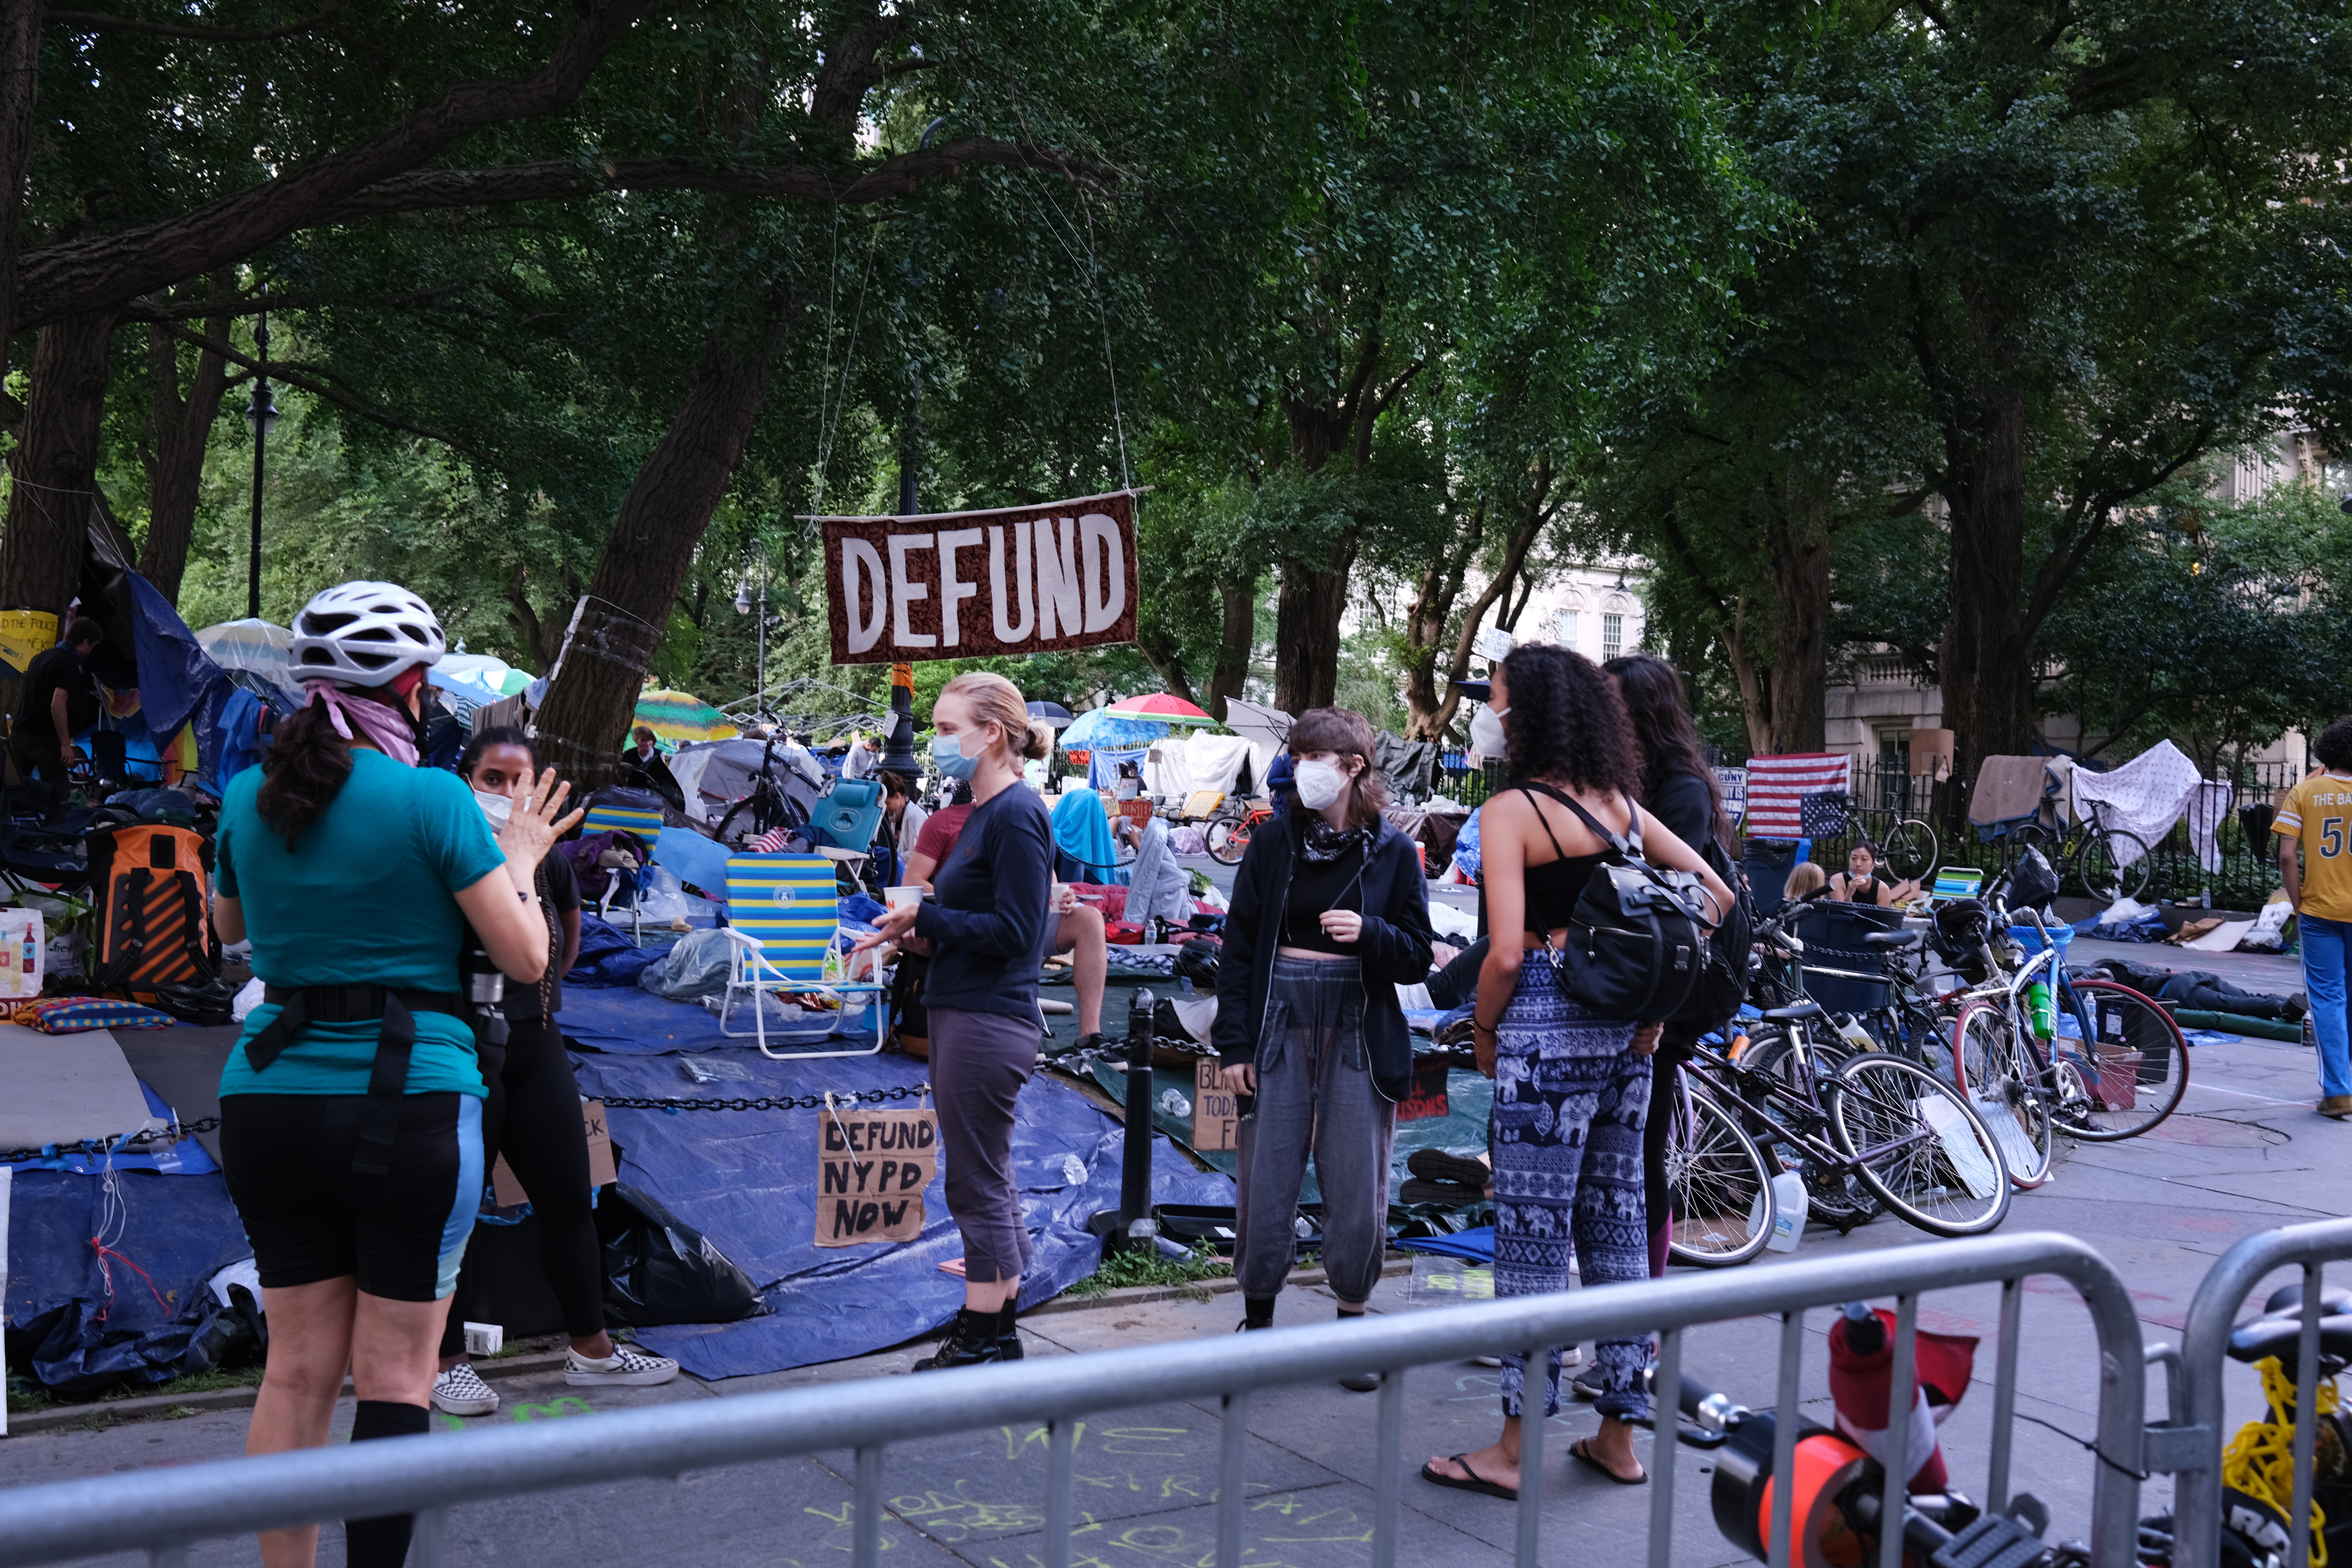 NEW YORK, NEW YORK - JUNE 30: A group of protesters affiliated with Black Lives Matter (BLM) and other groups congregate in a park outside of City Hall in Lower Manhattan as they continue to demand that the New York City Police Department (NYPD) be defunded on June 30, 2020 in New York City. (Photo by Spencer Platt/Getty Images)